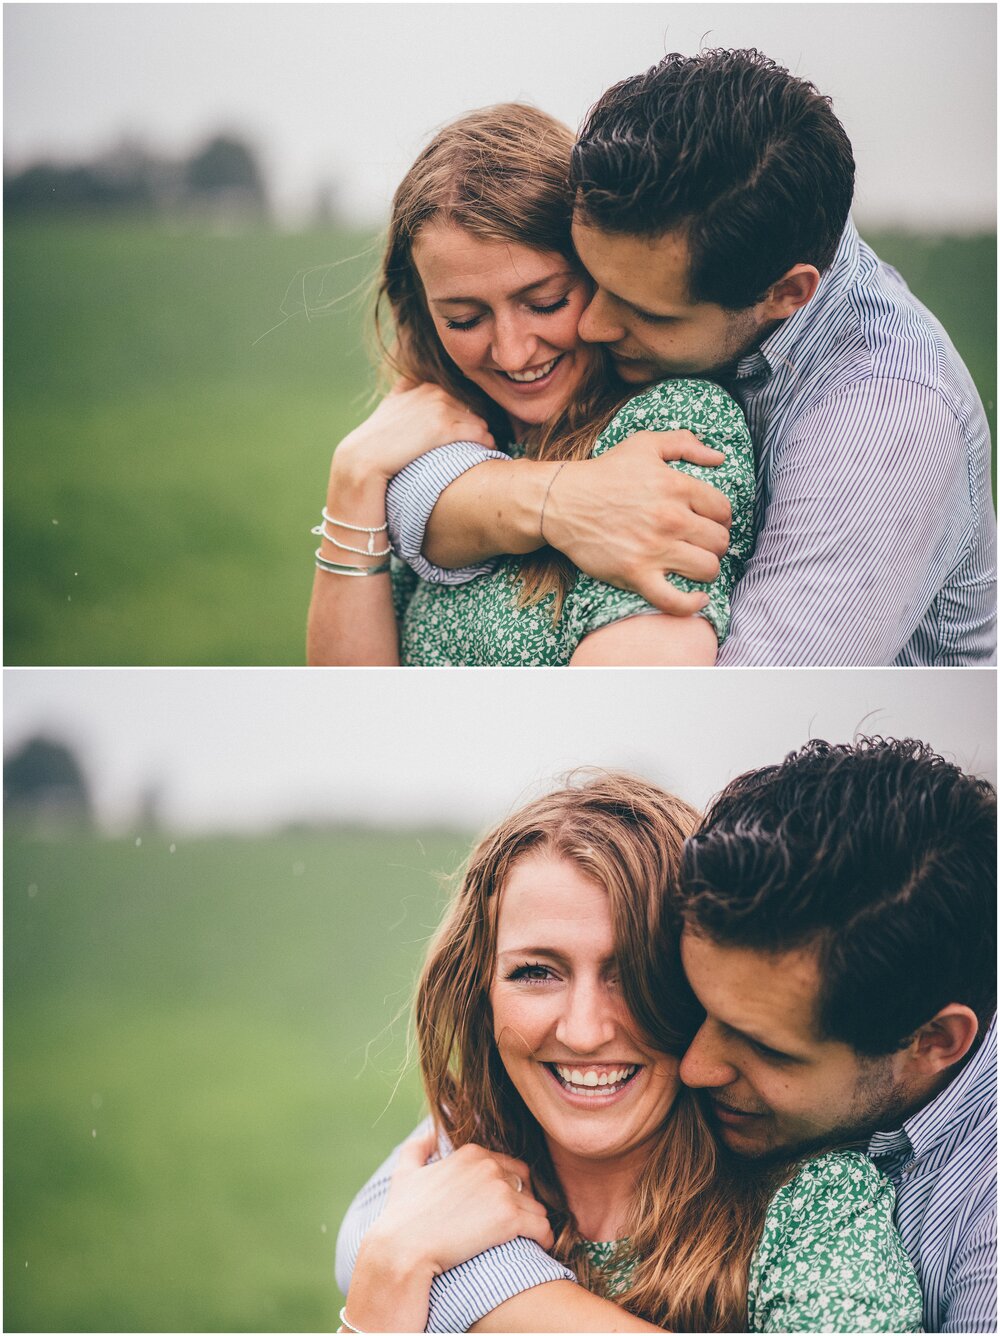 Young couple embrace in the rain during their would be wedding photoshoot.